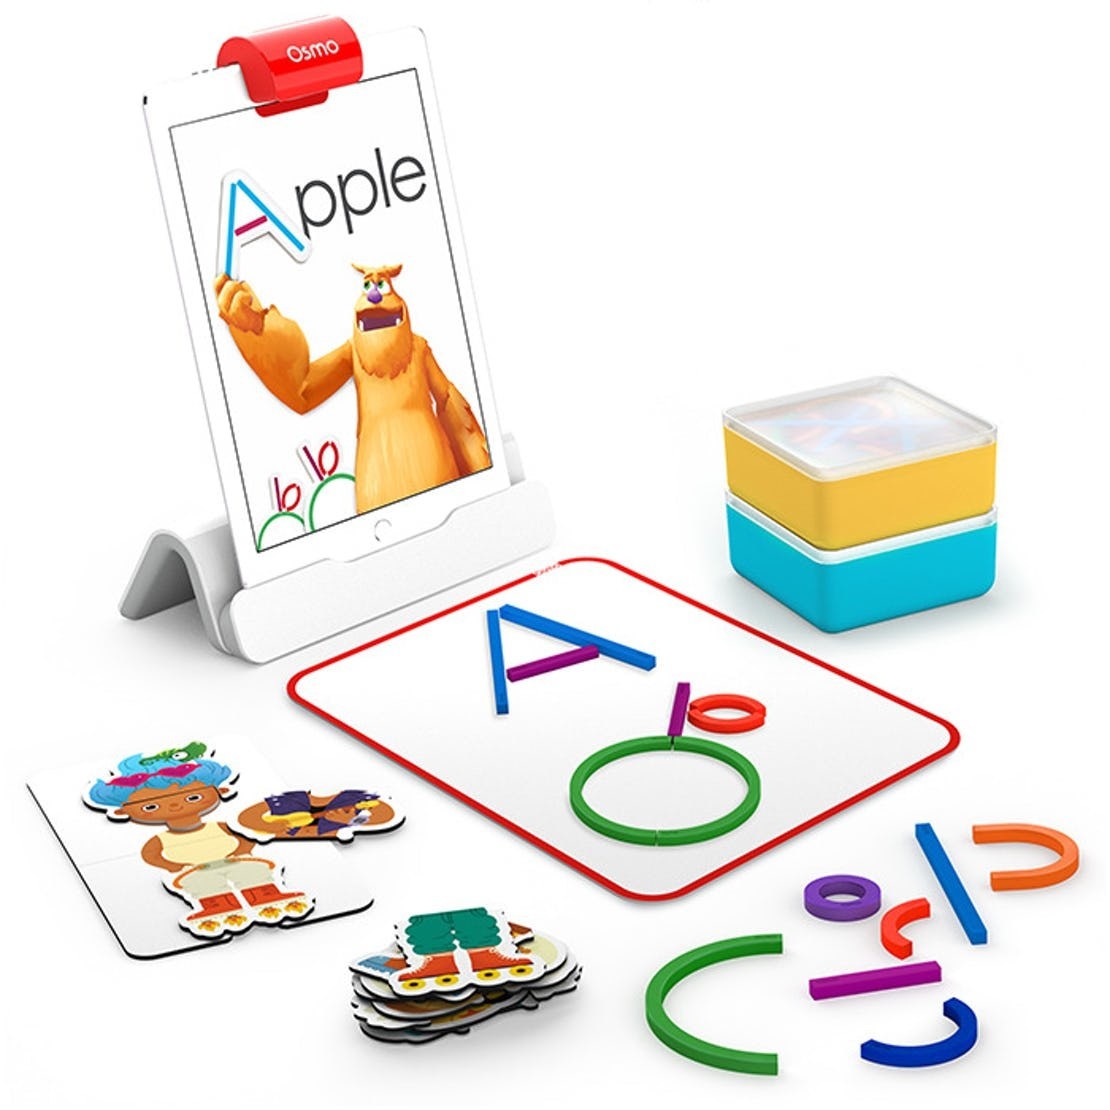 An iPad, puzzles and letters fashioned out of colorful shapes